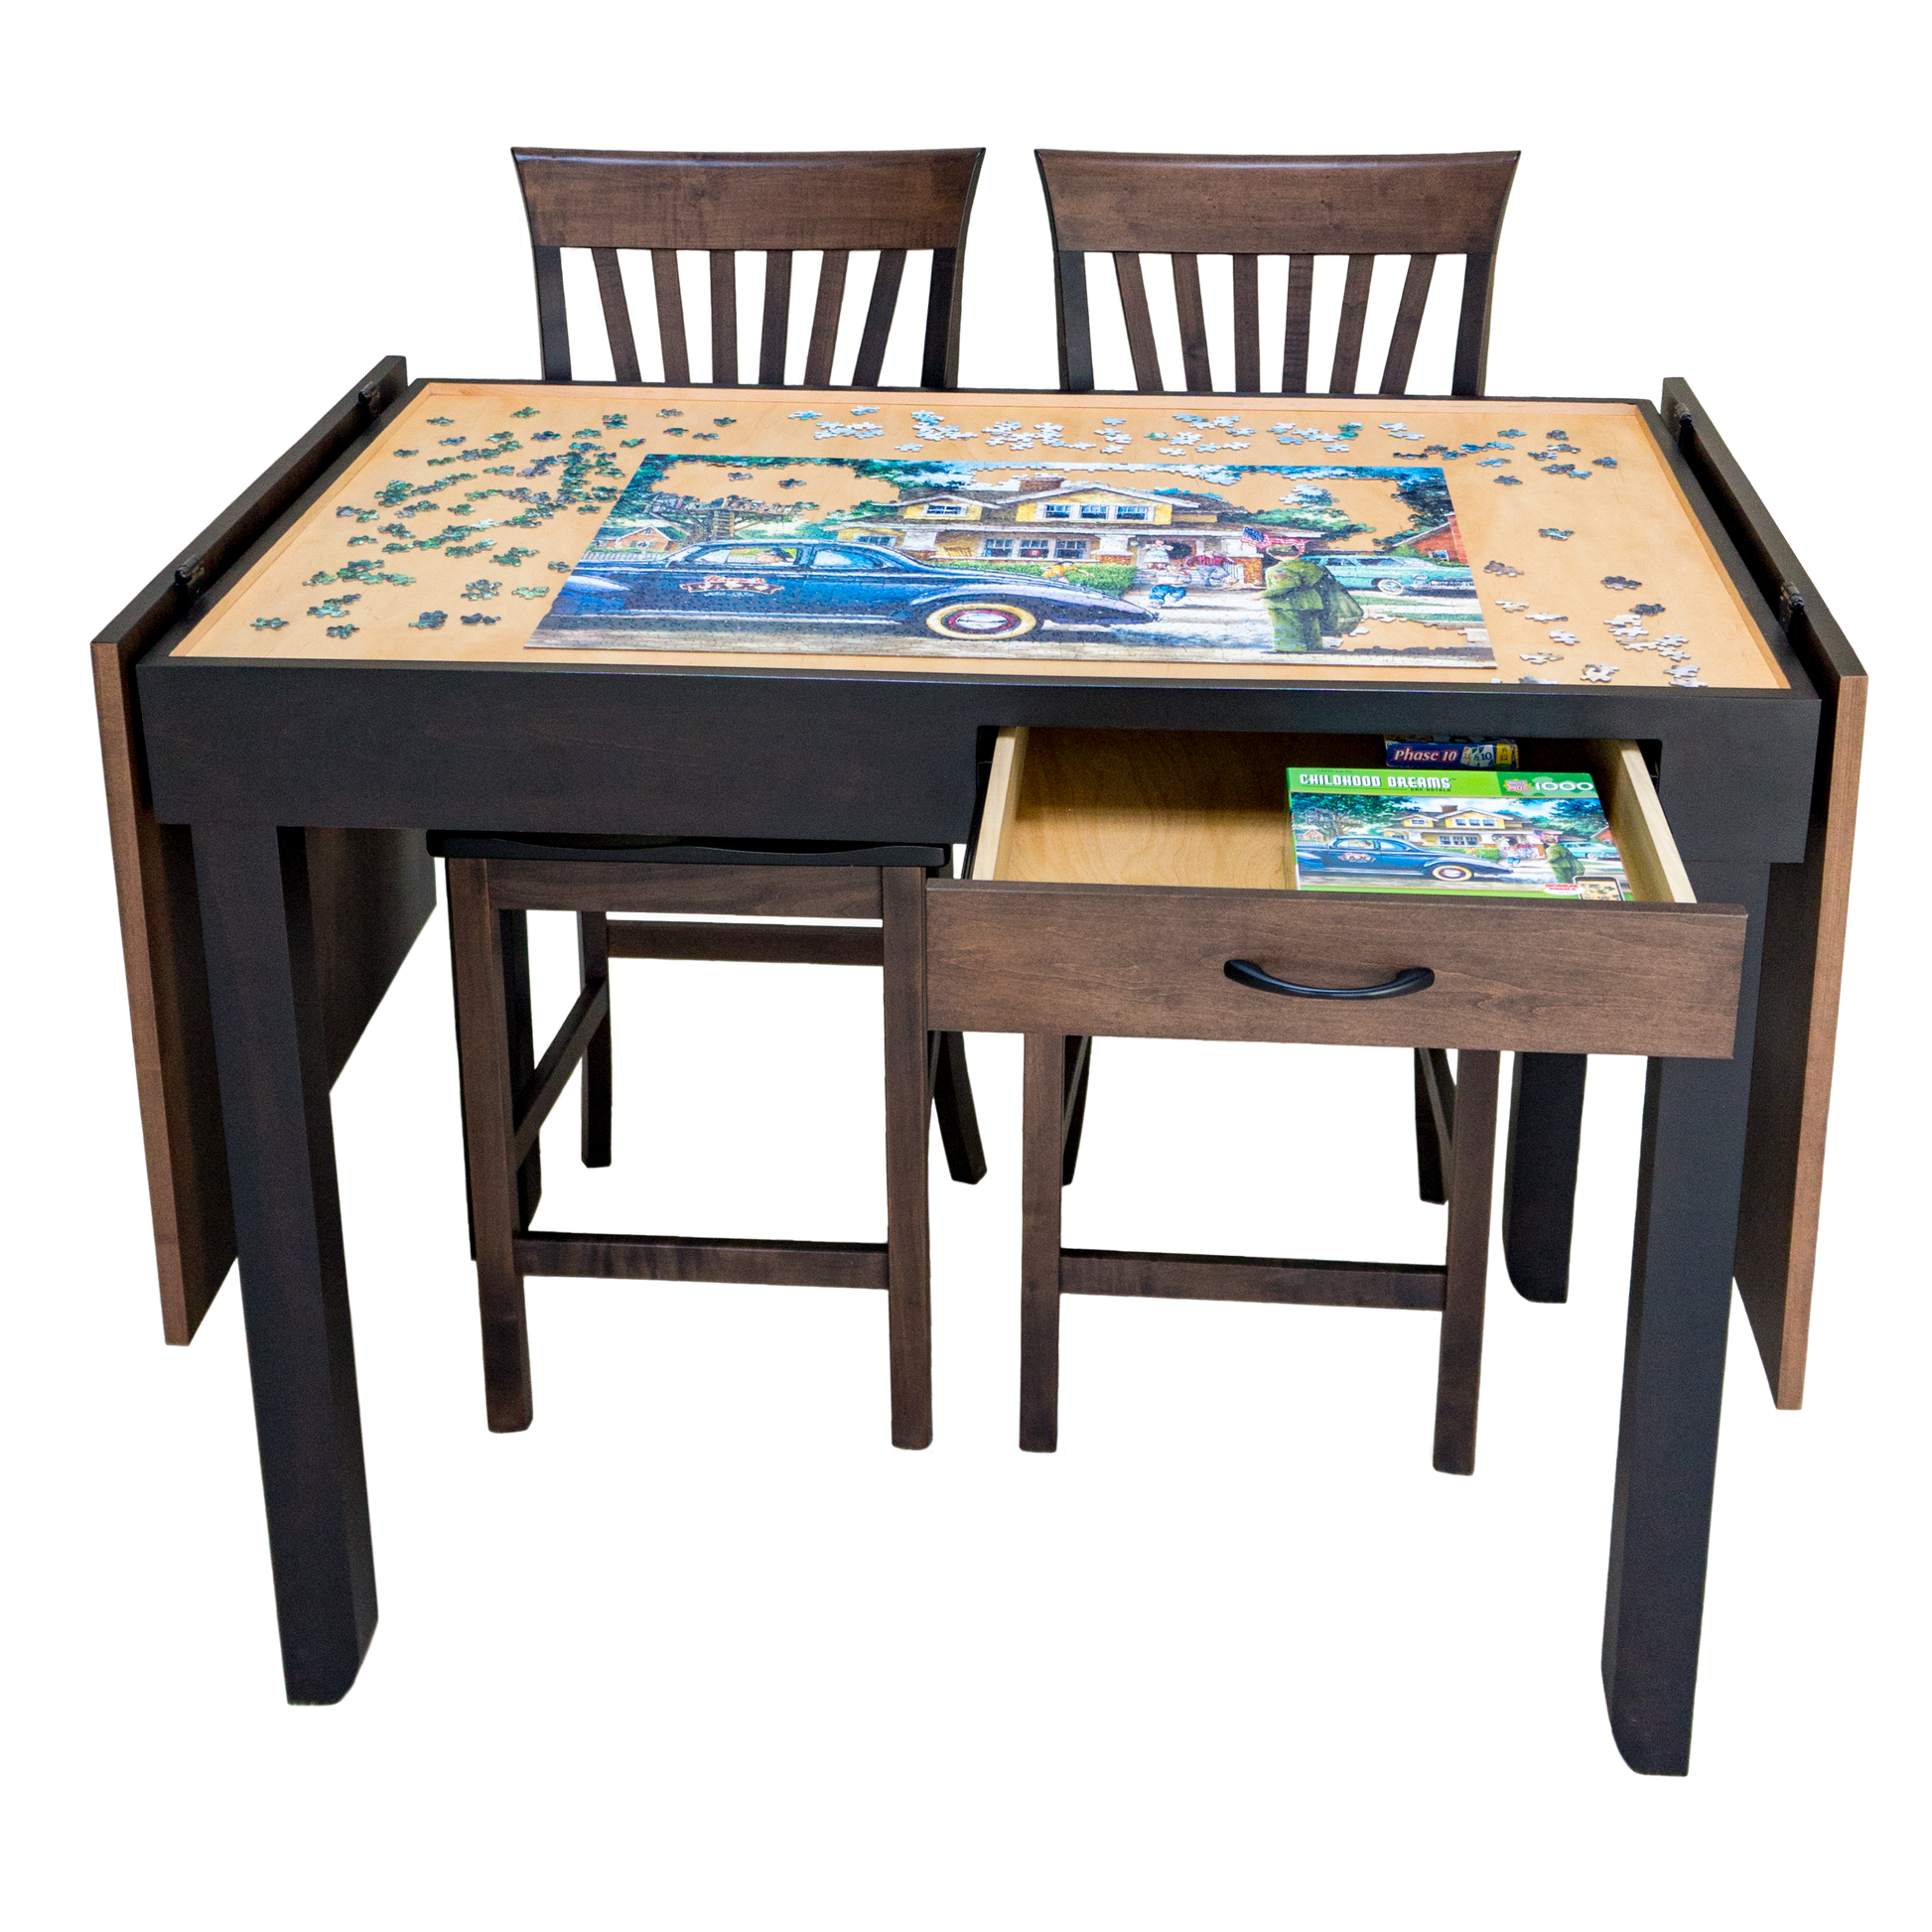 ATDAWN 1000 Pieces Wooden Puzzle Table, Jigsaw Puzzle Table